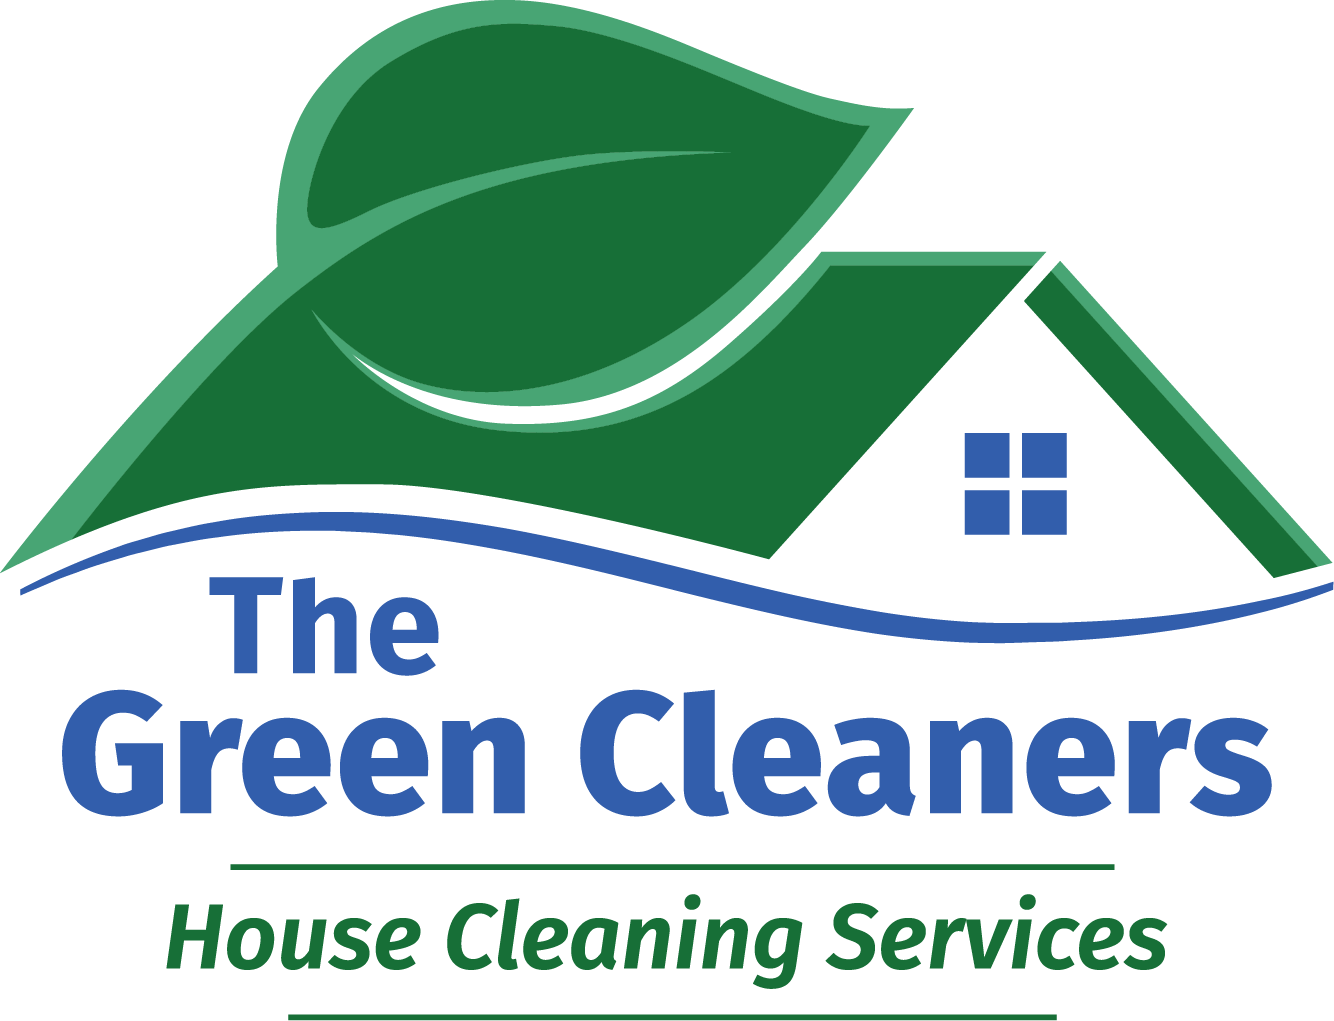 The Green Cleaners of North Carolina